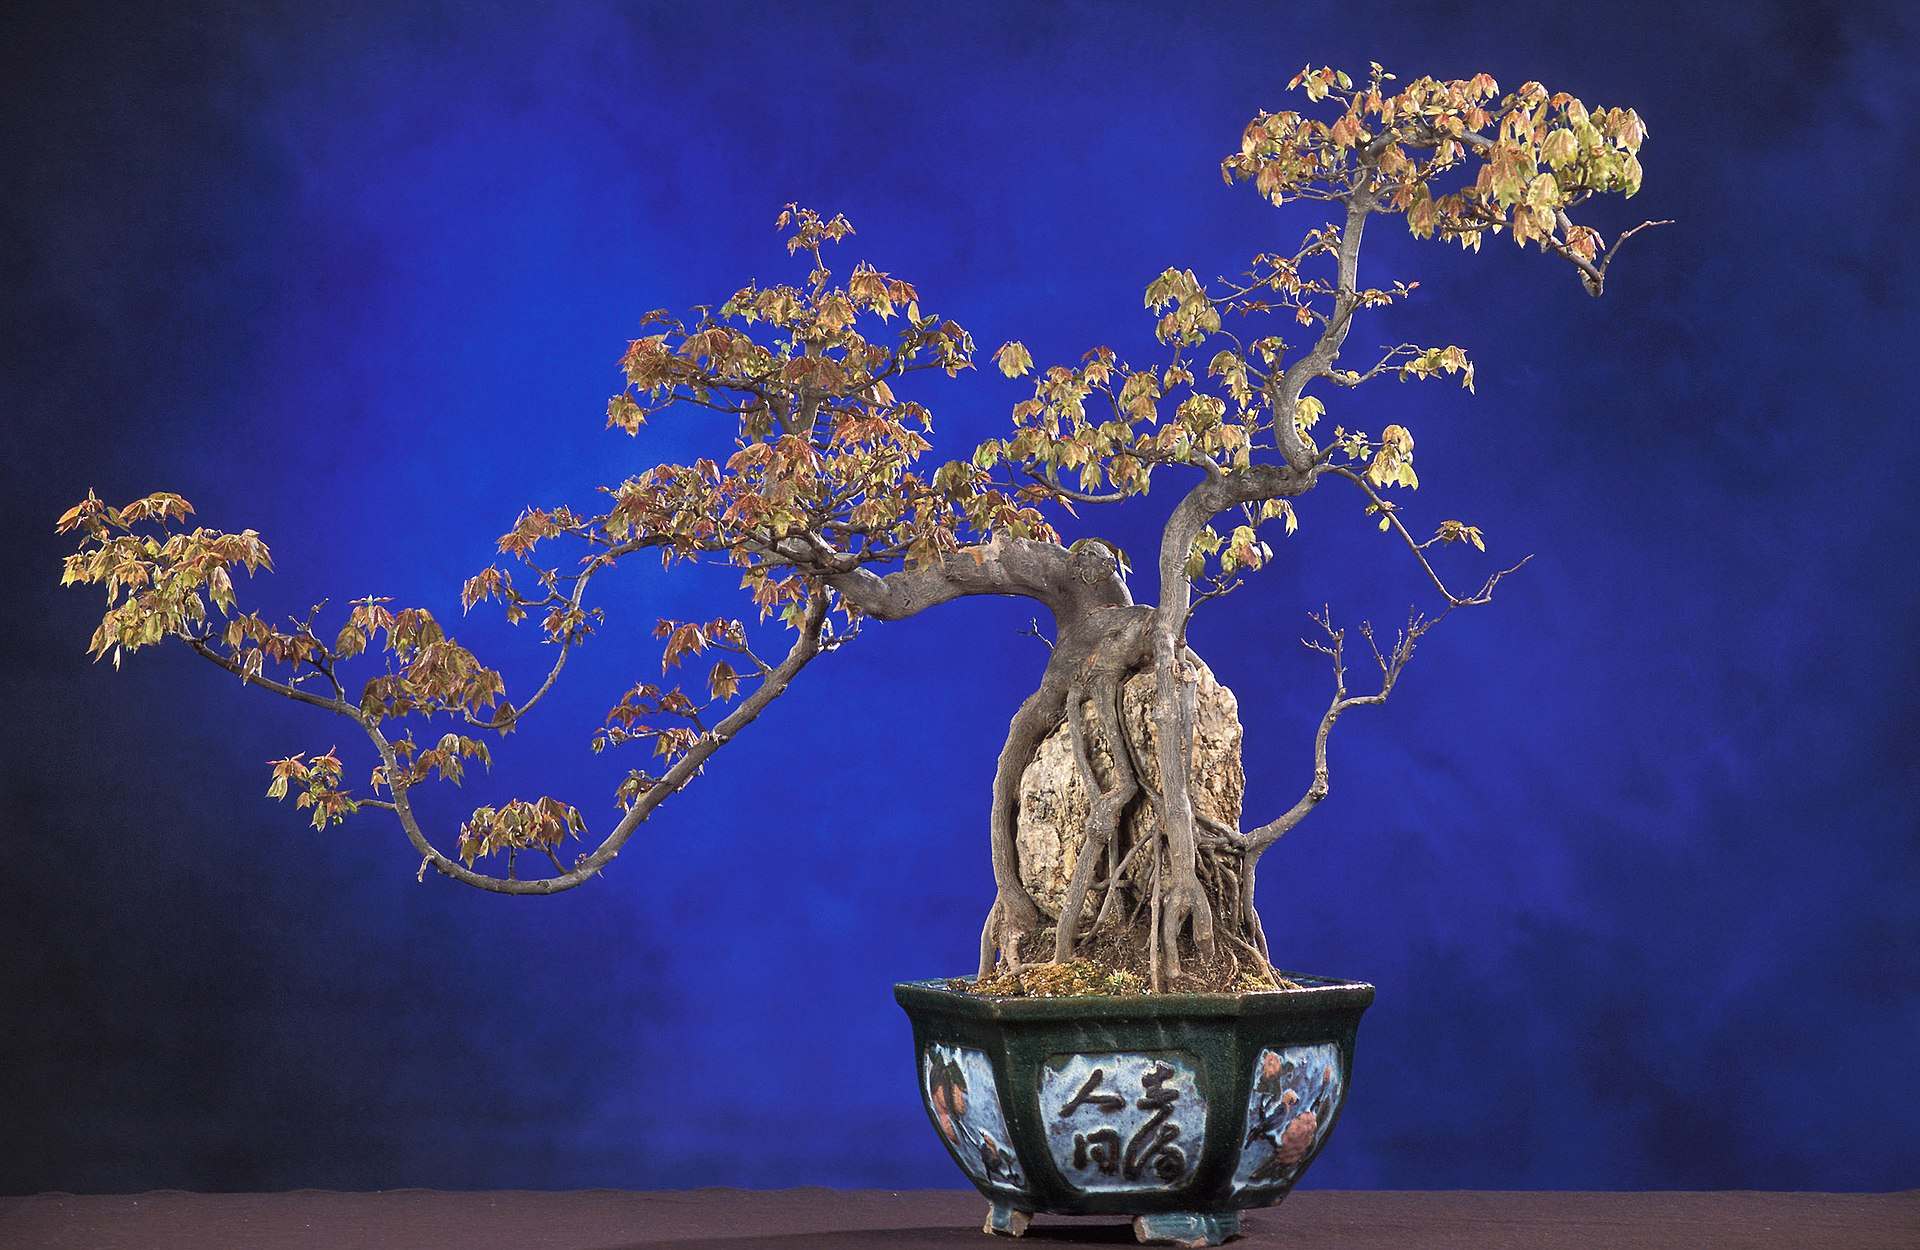 Part of the penjing collection at the National Bonsai and Penjing Museum, this trident maple, Acer buergerianum, has its roots growing over a rock and its foliage and stems trimmed in the shape of a dragon